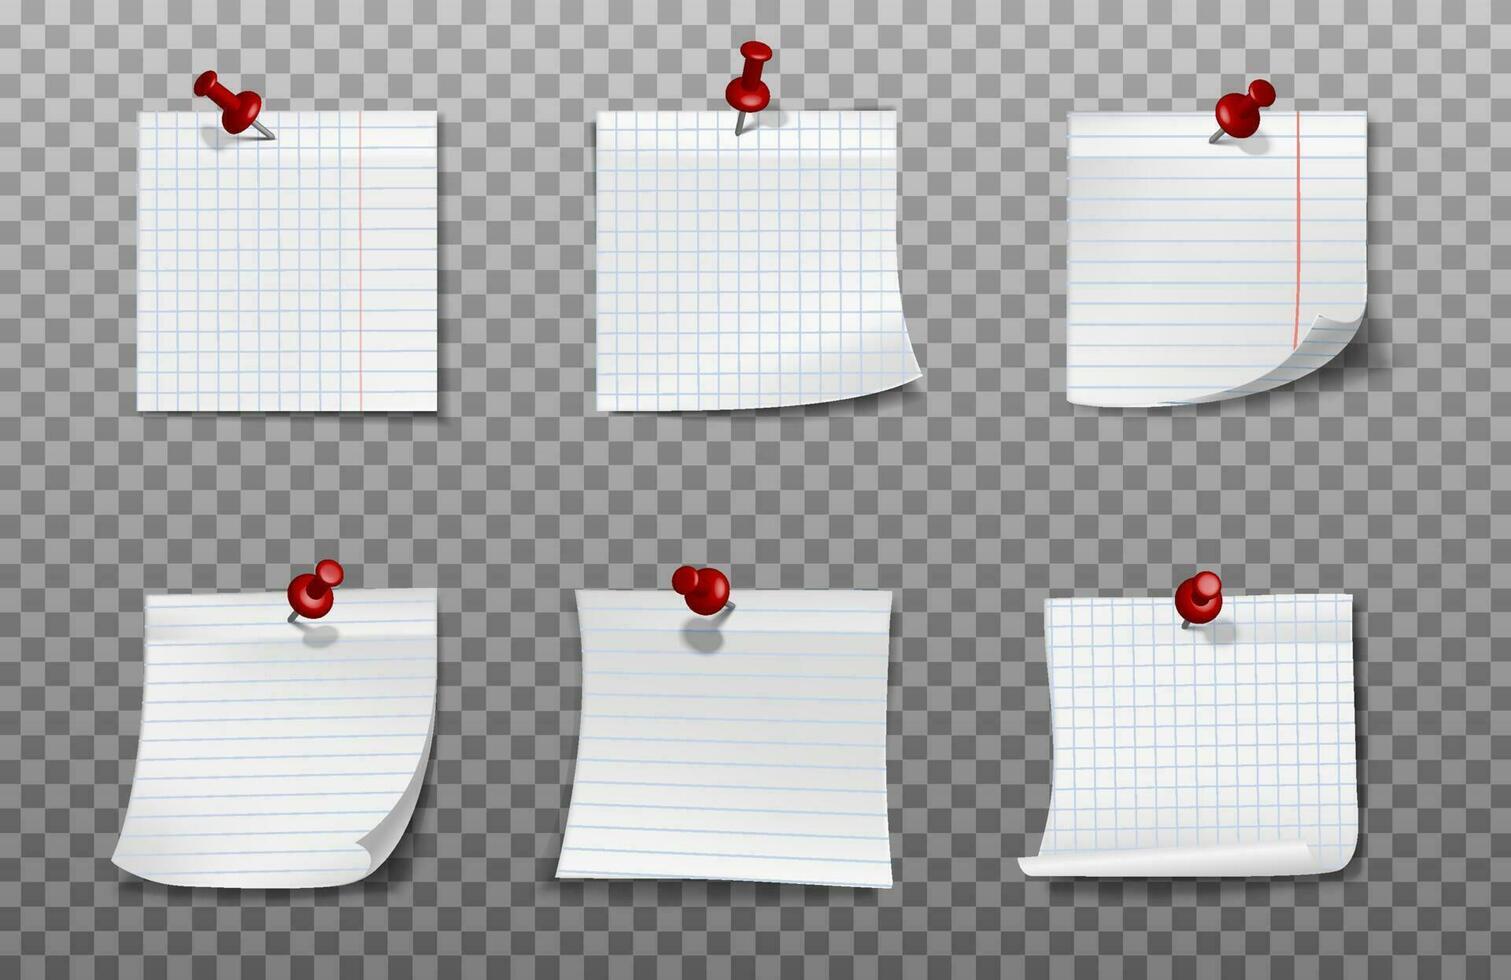 3d realistic vector white paper squares for notes pinned to the wall with red paper pins.